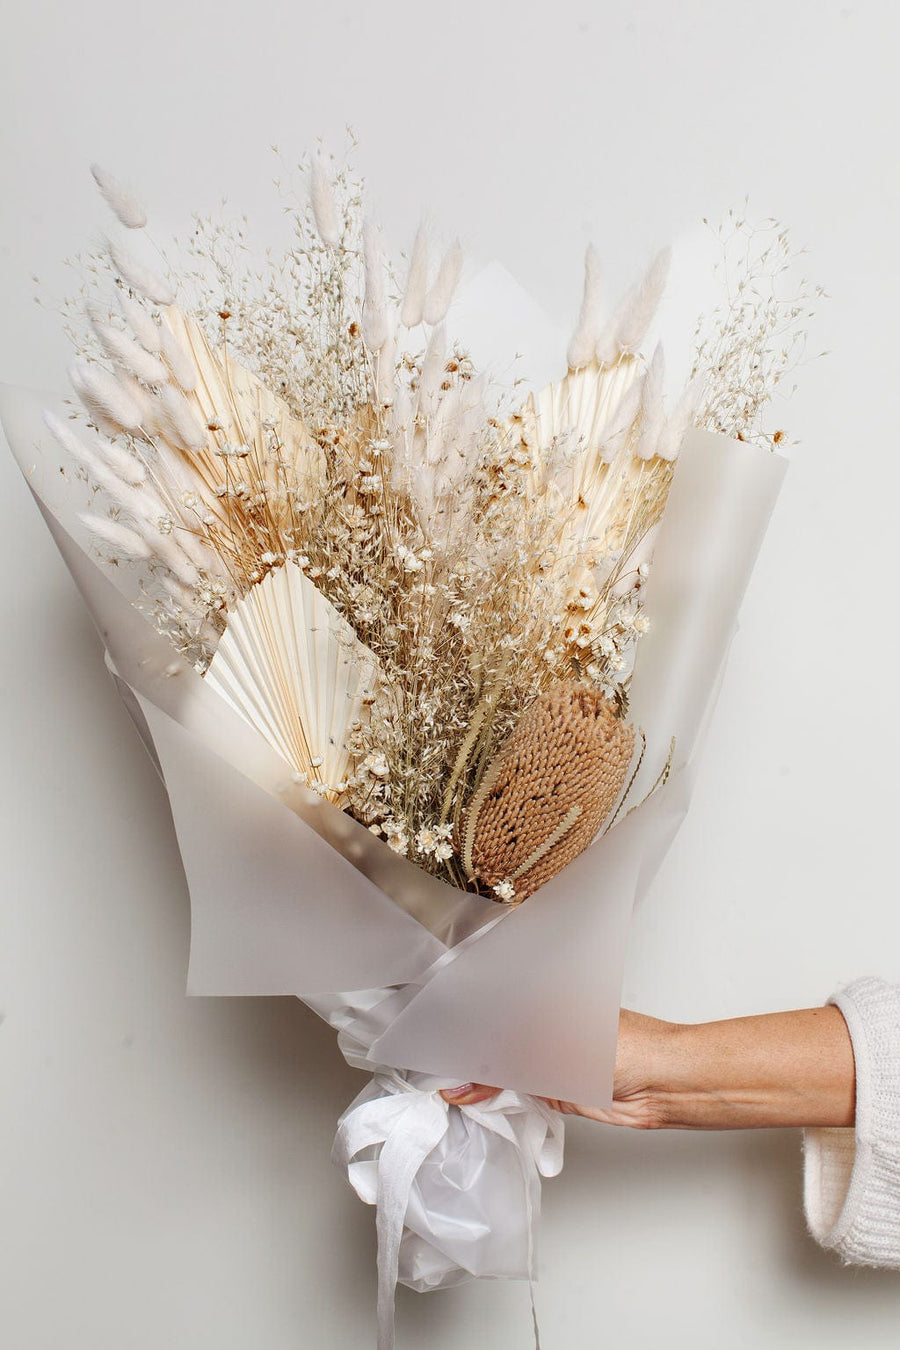 Idlewild Floral Co. Bouquets The California Bouquet Standard